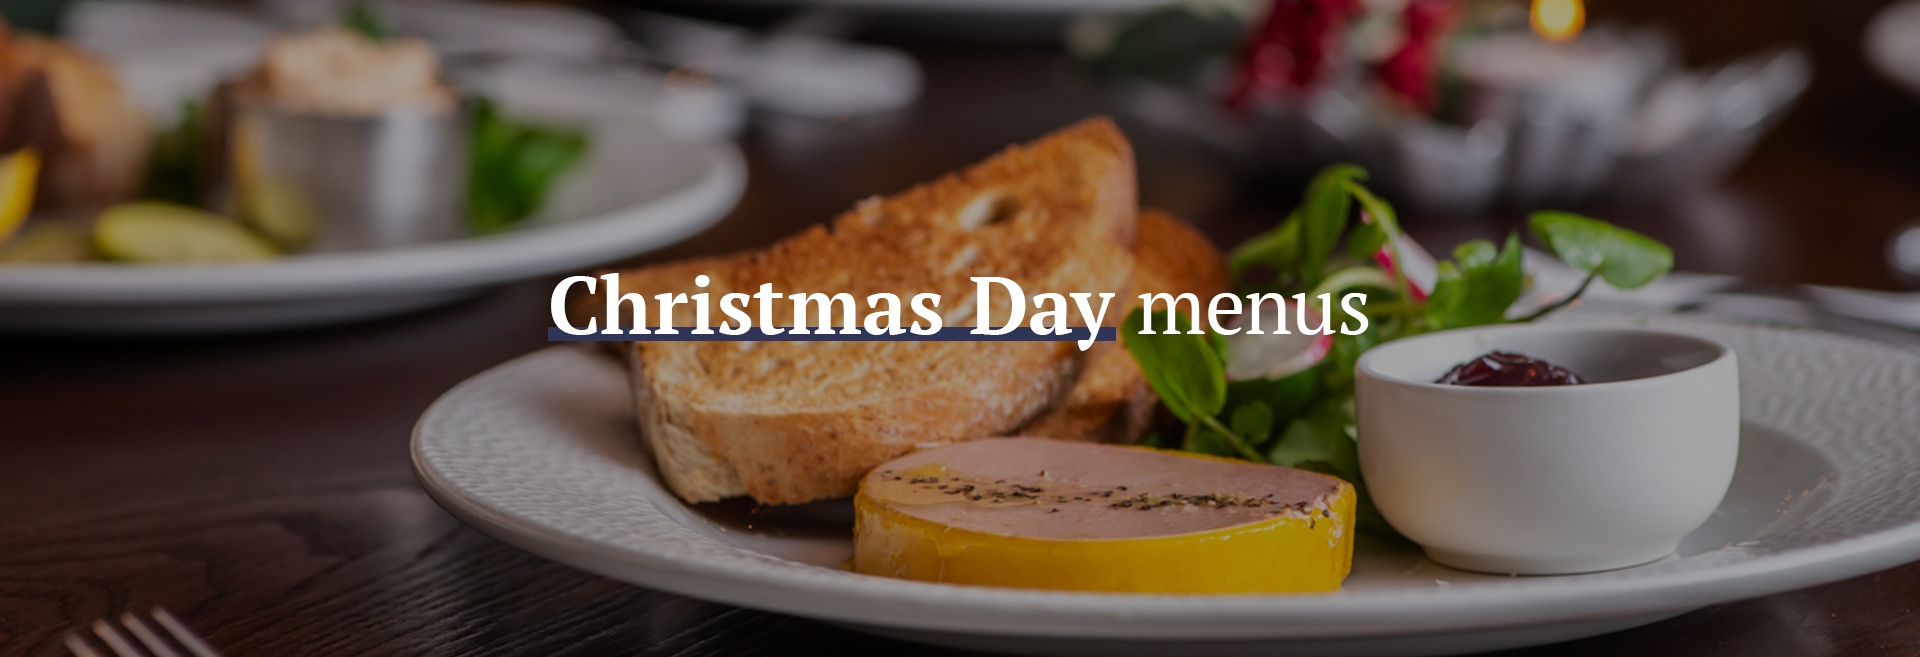 Christmas Day Menu at The Drummond